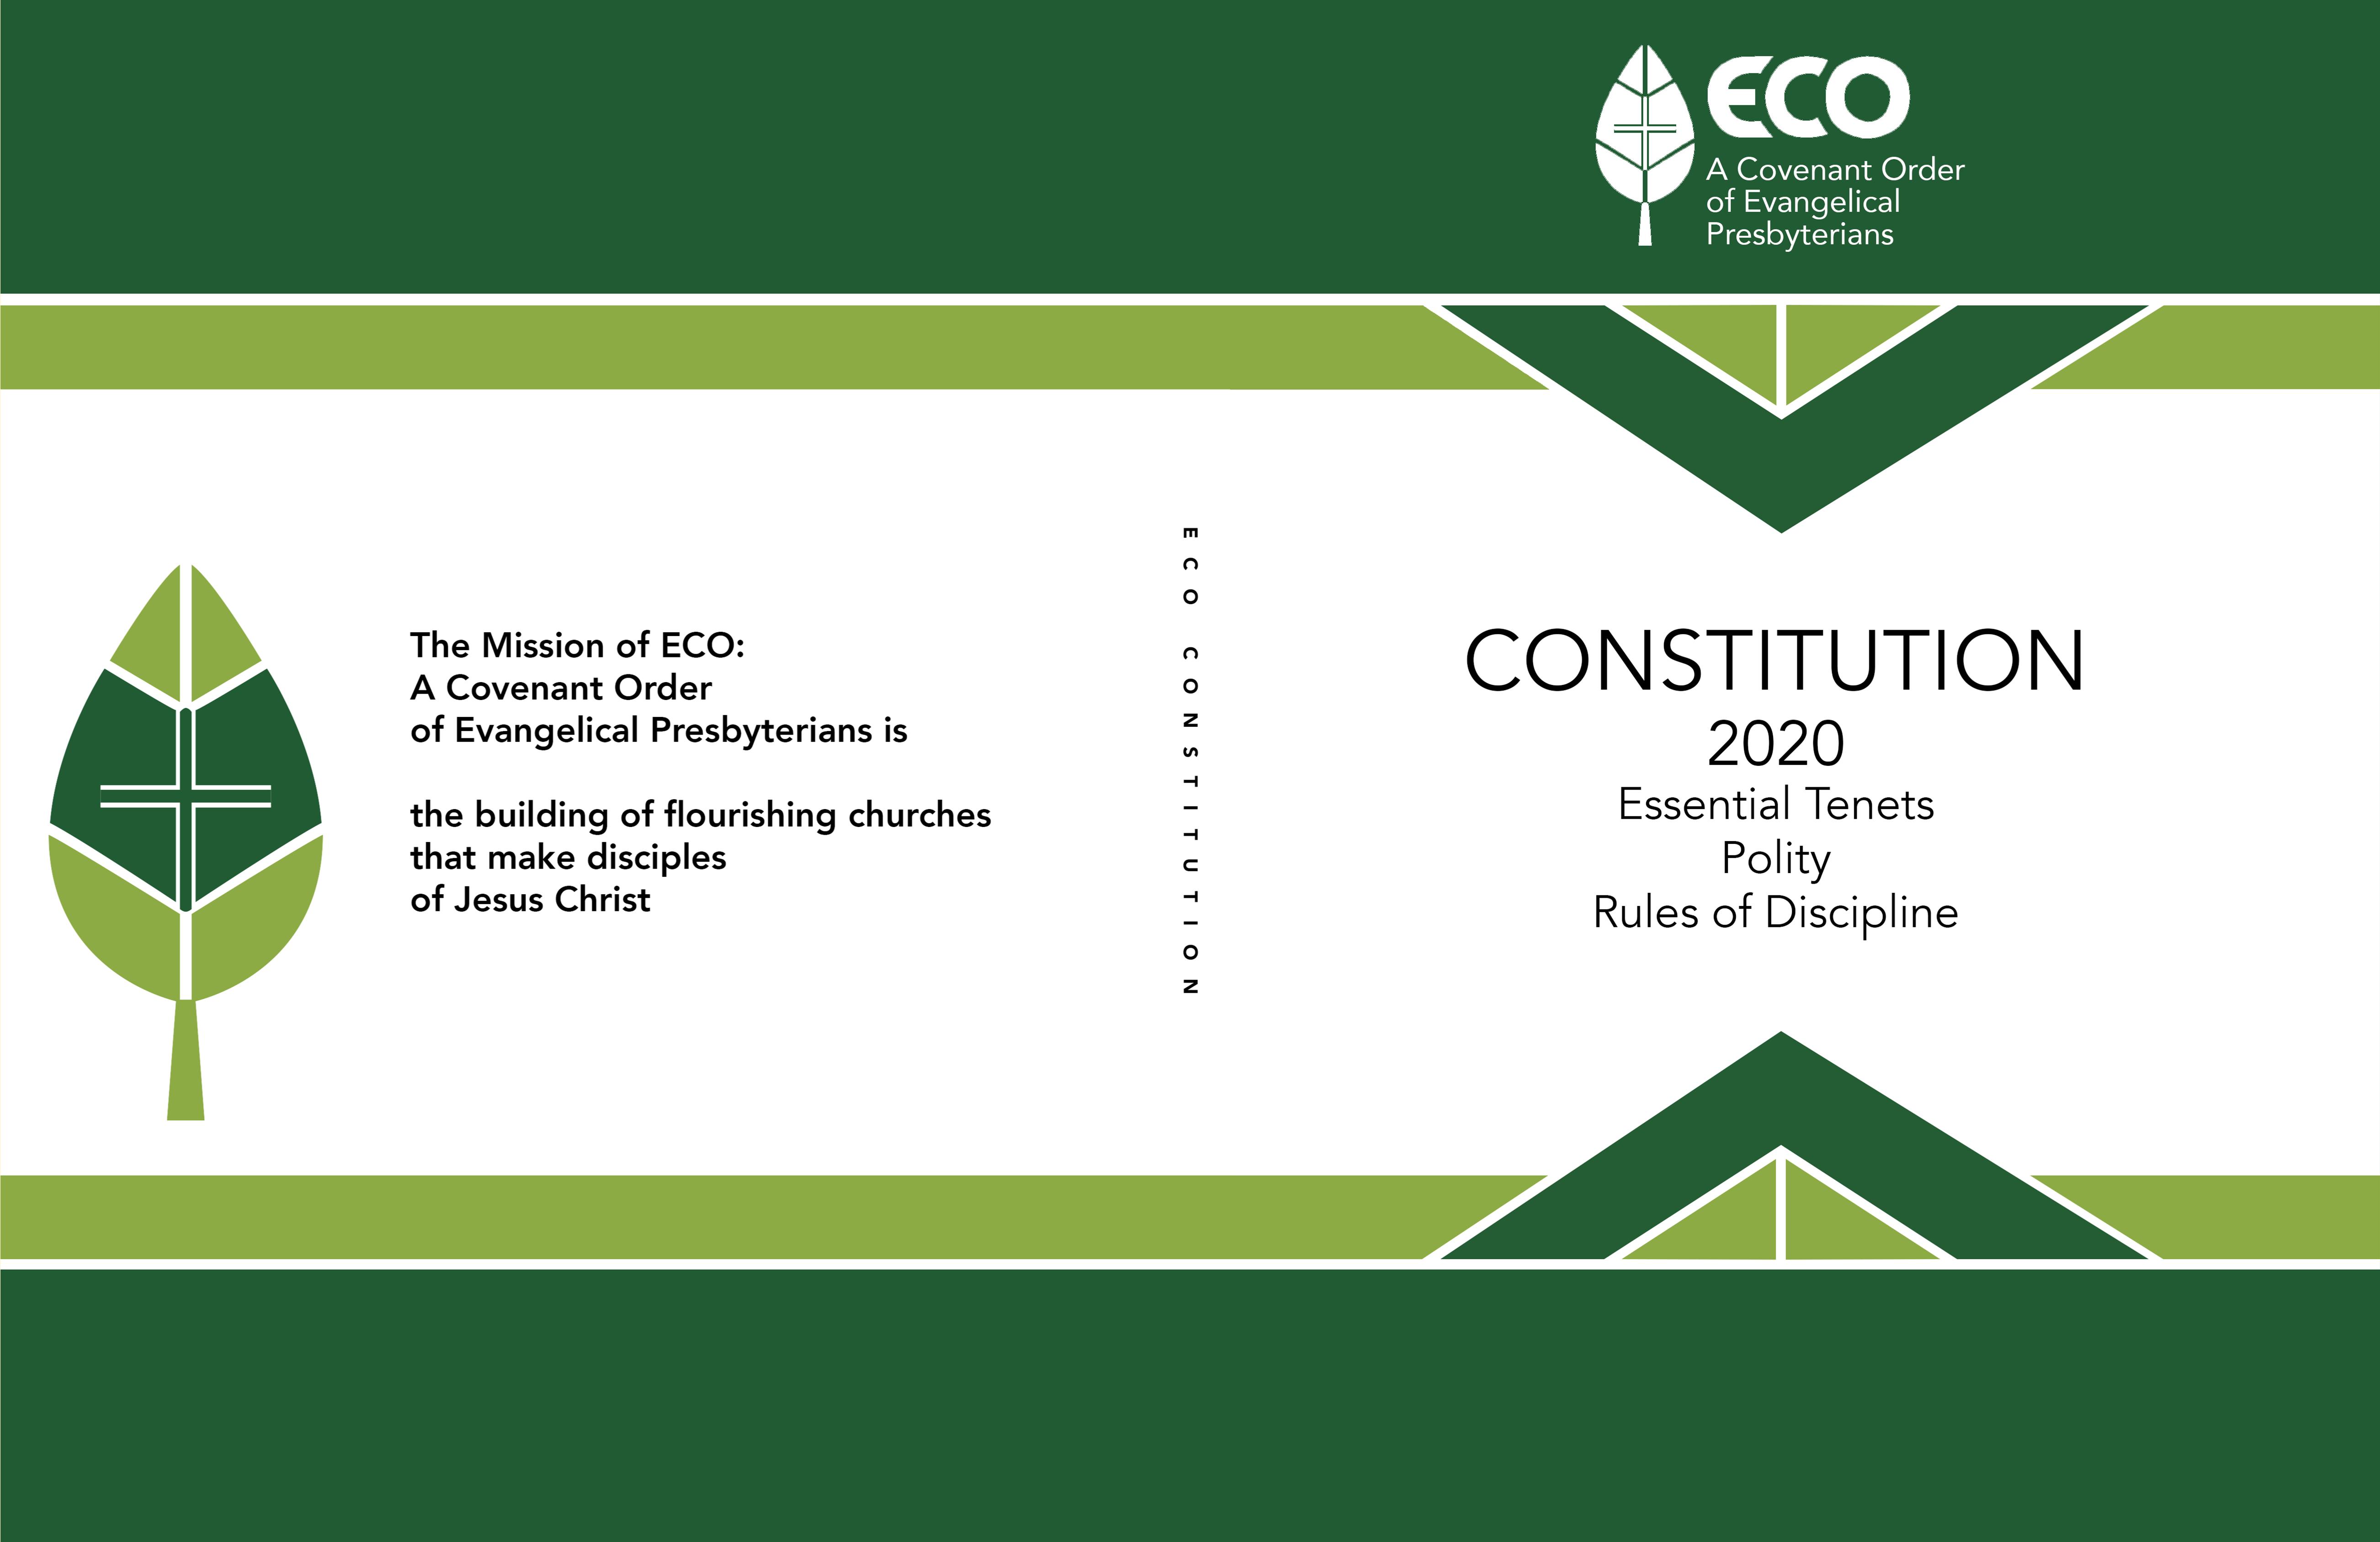 ECO Constitution cover image